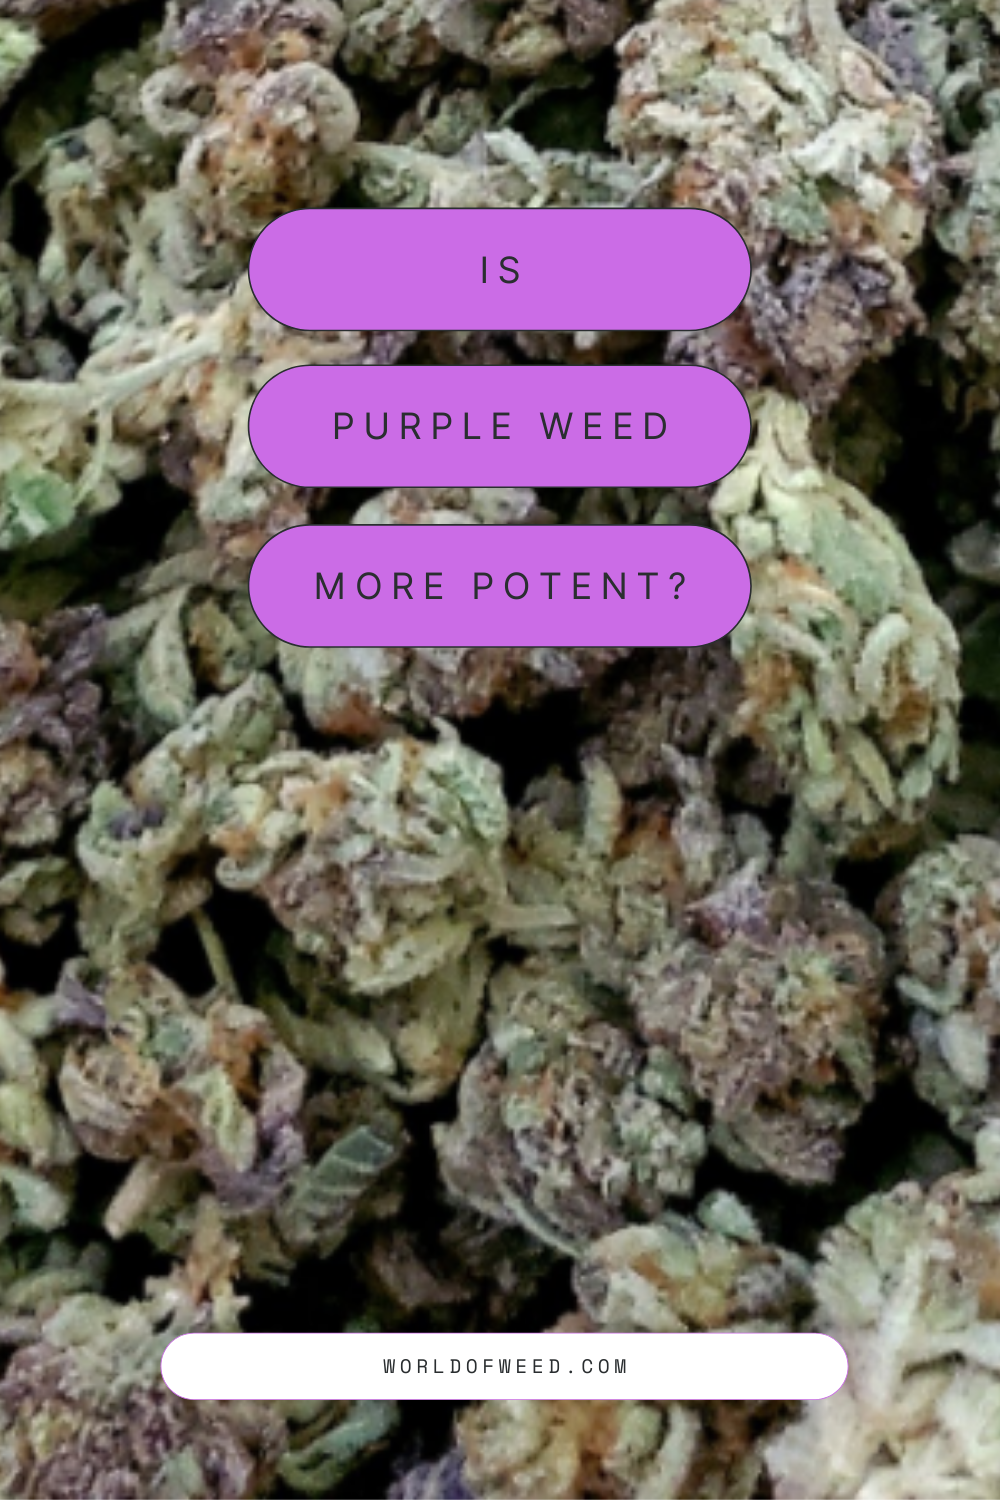 Is Purple Weed More Potent?